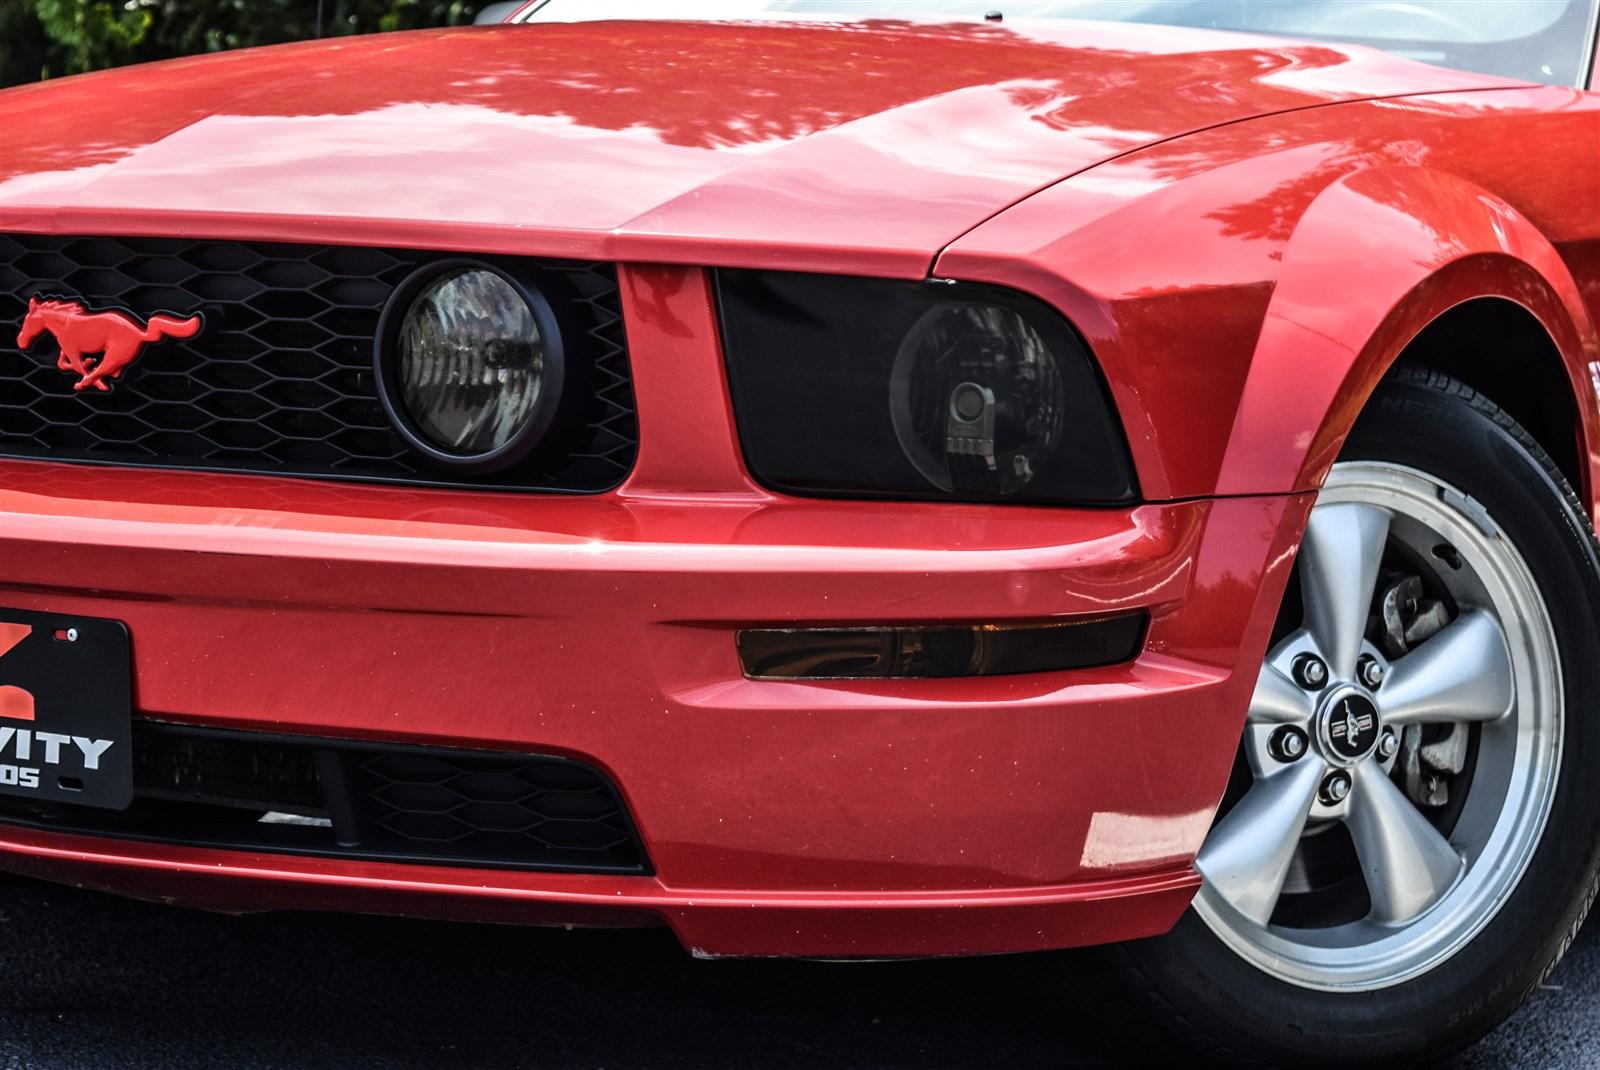 Used 2009 Ford Mustang GT Premium for sale Sold at Gravity Autos Marietta in Marietta GA 30060 3